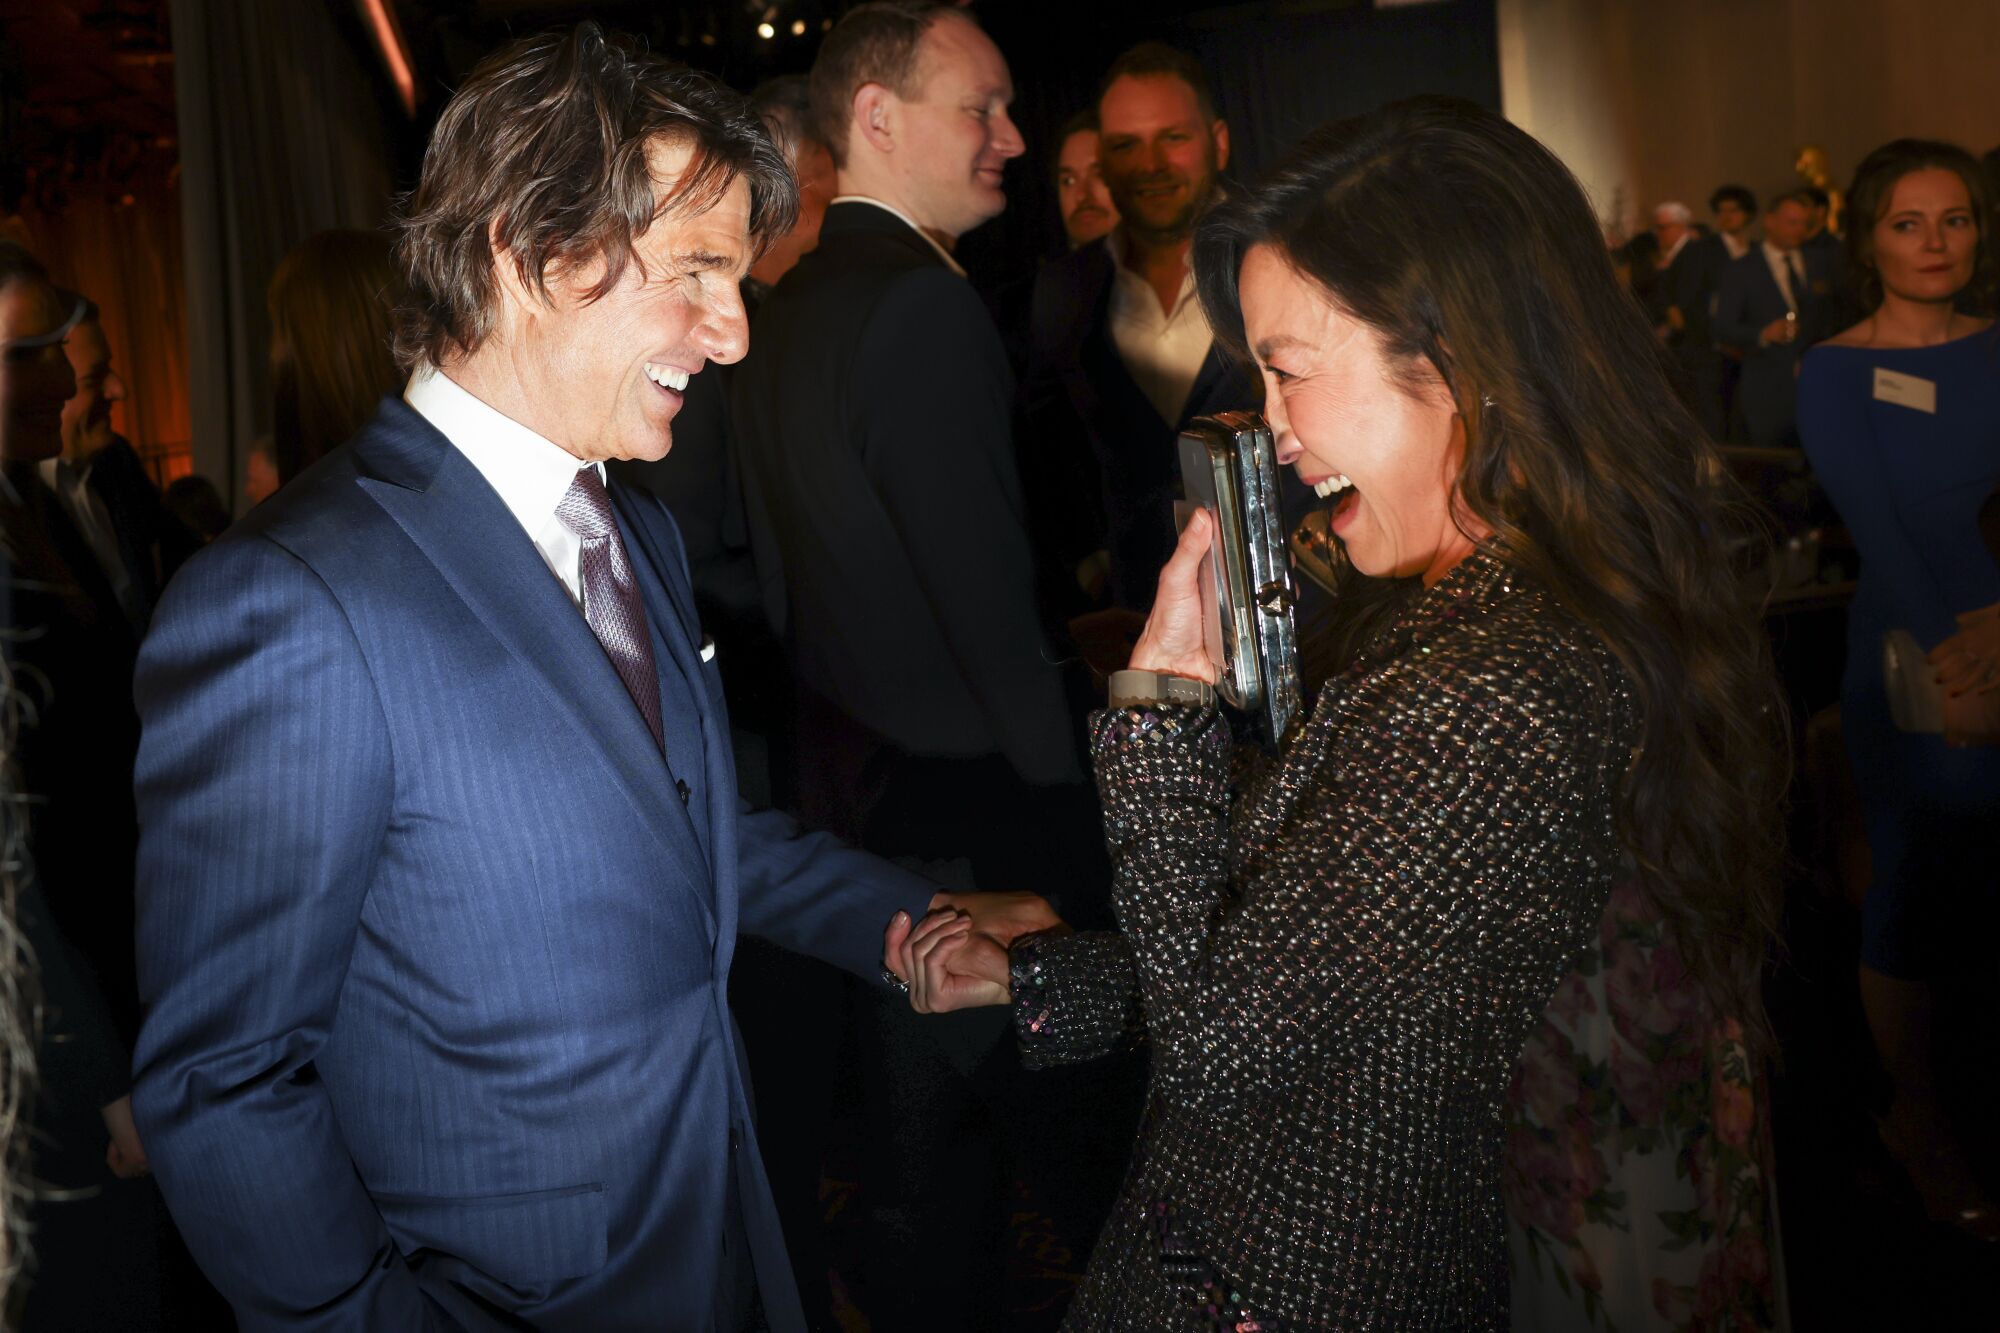 Actors Tom Cruise and Michelle Yeoh laugh as they fact each other in a crowd.